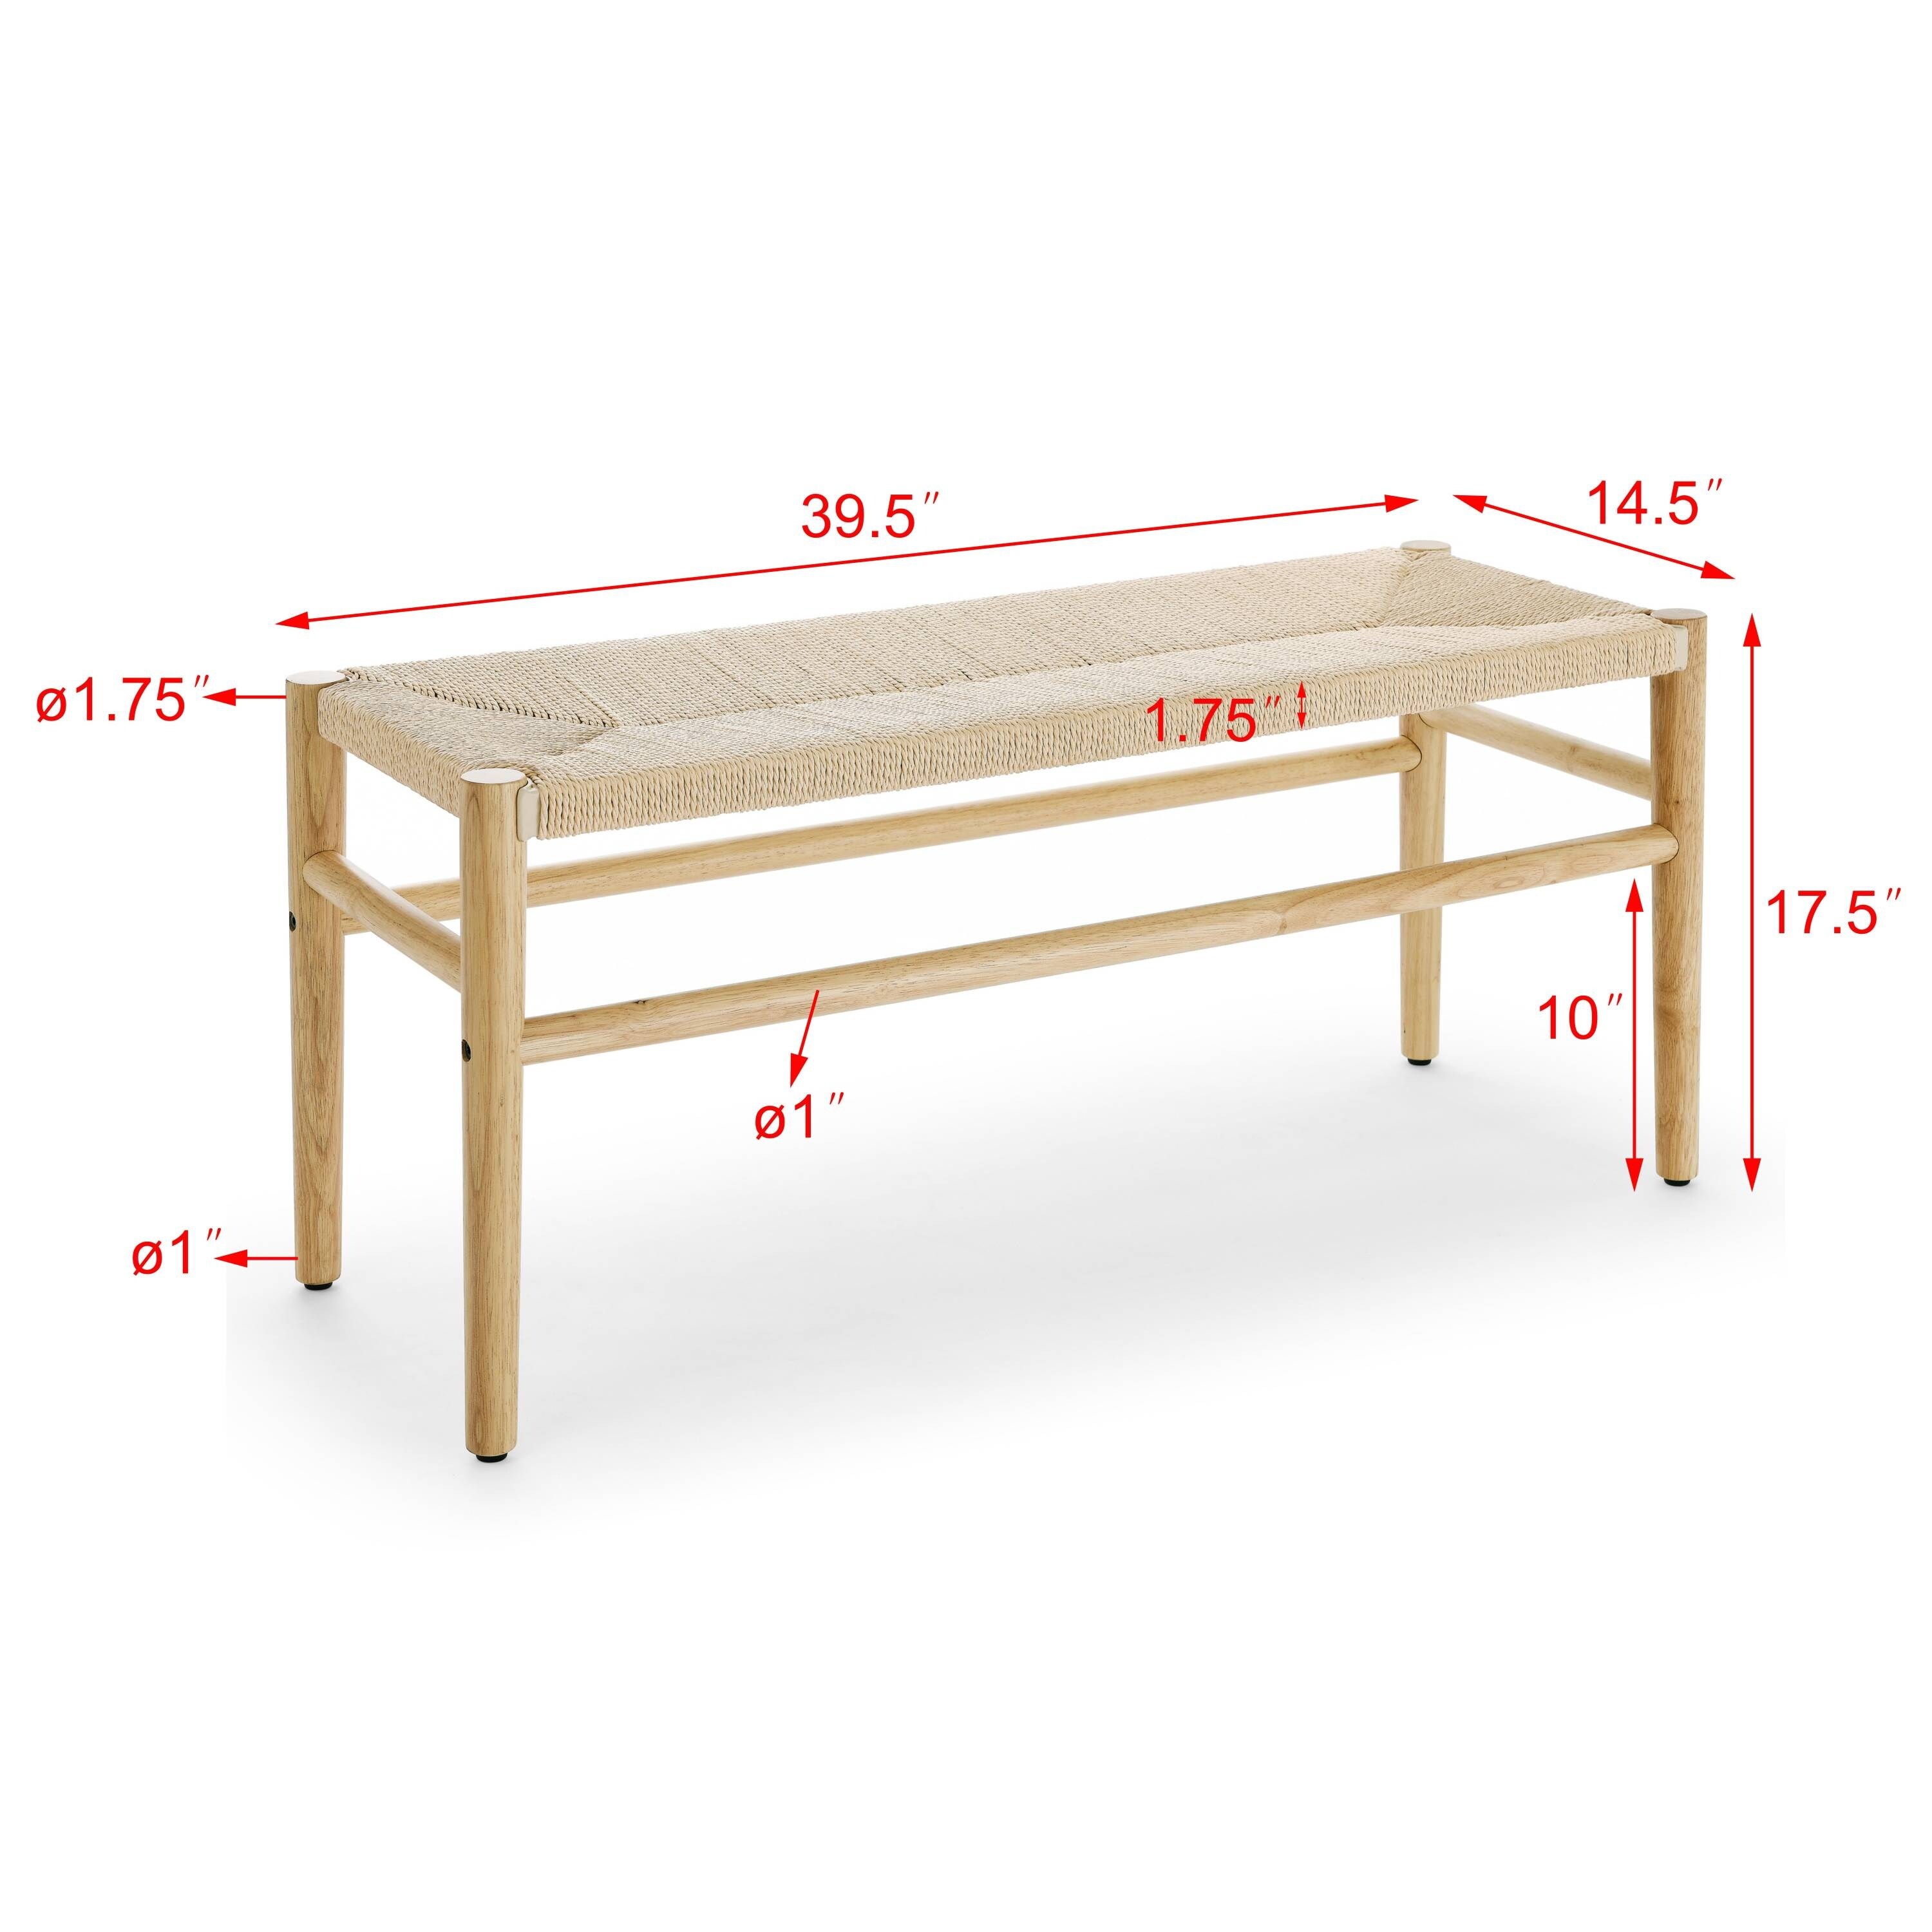 Indoor Bench with Paper Cord, Rubber Wood Legs for Entryway Living Room Bedroom,